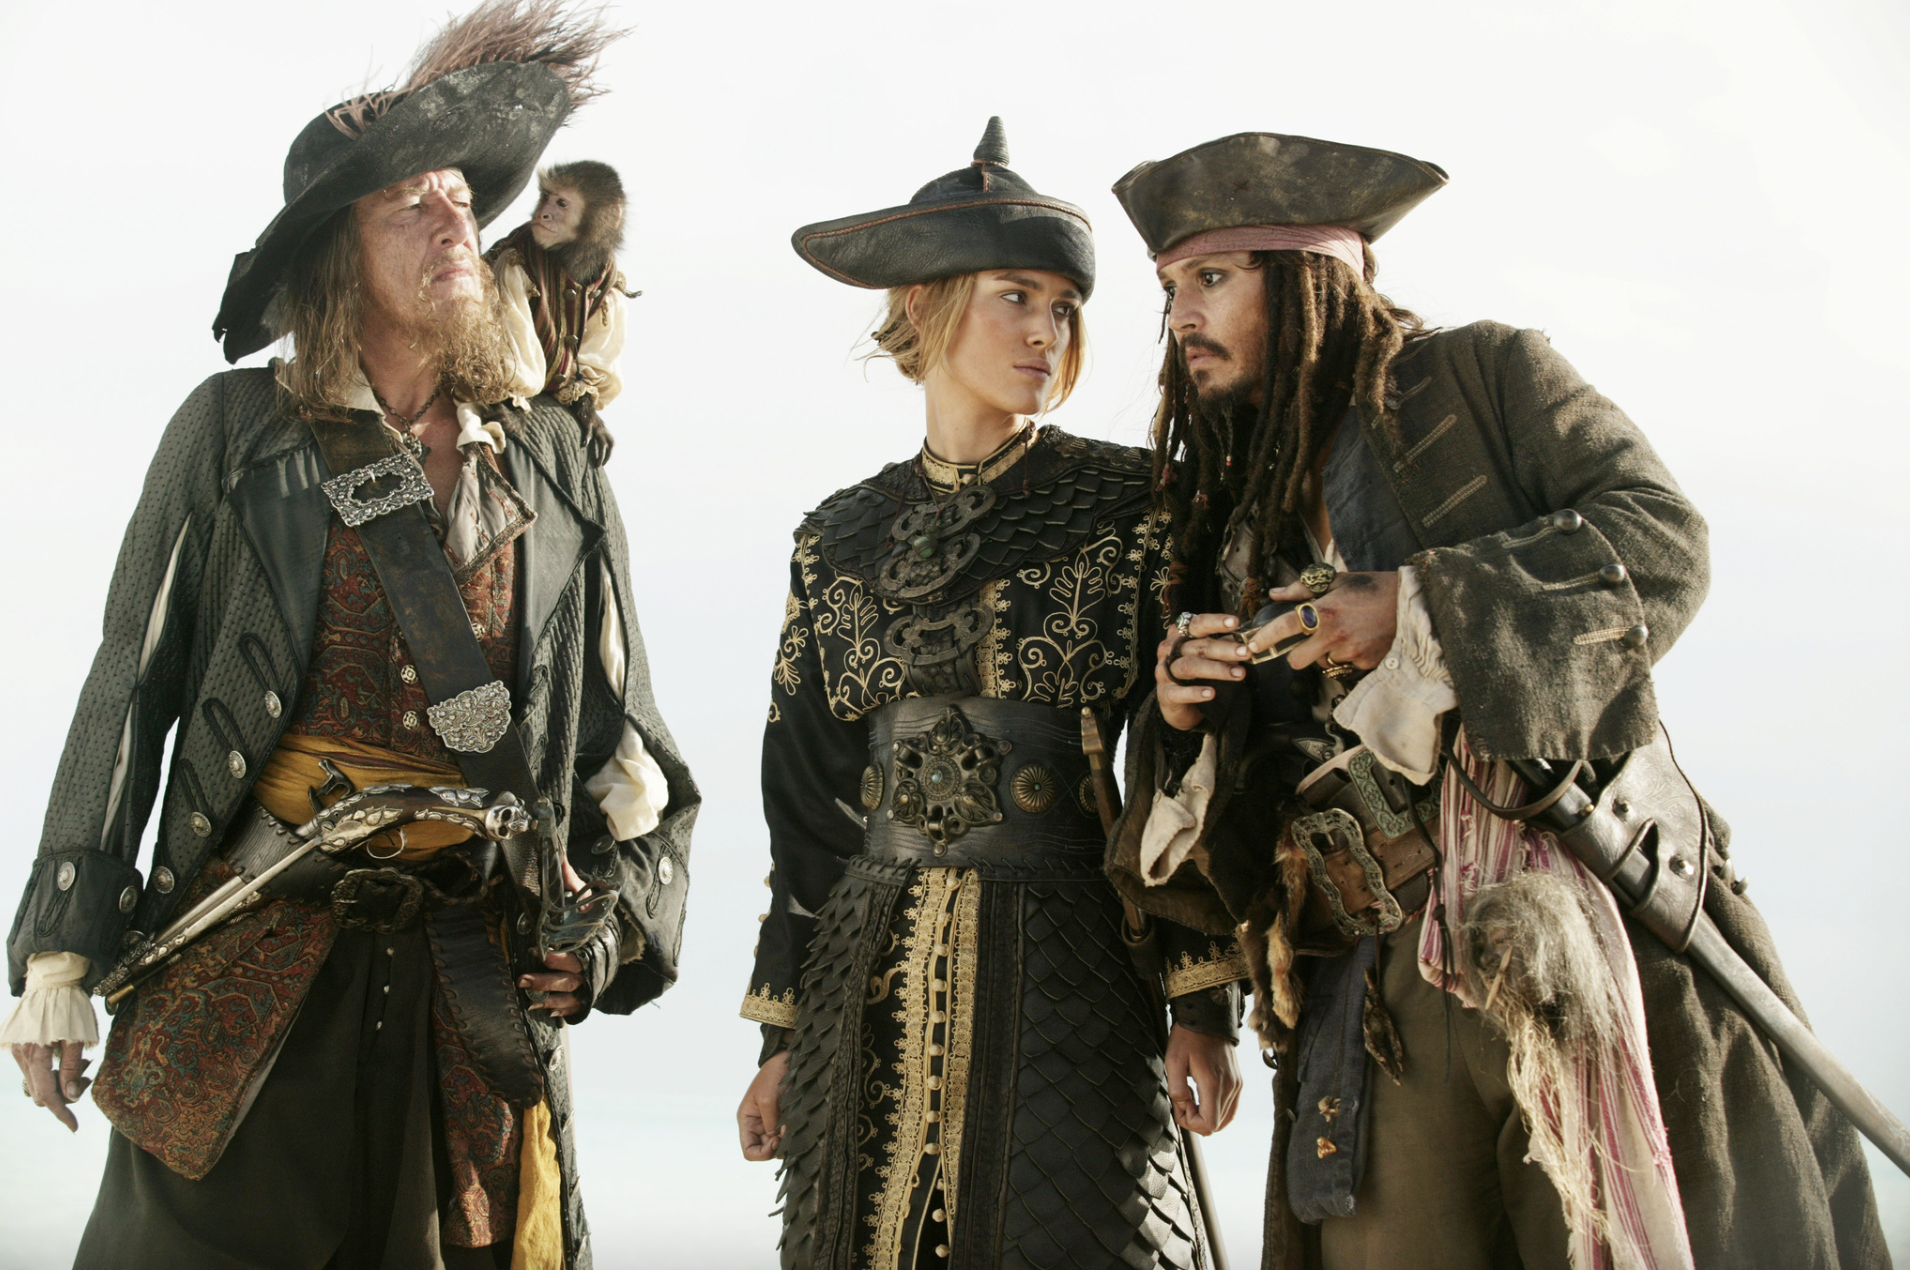 How to Watch the 'Pirates of the Caribbean' Movies Order